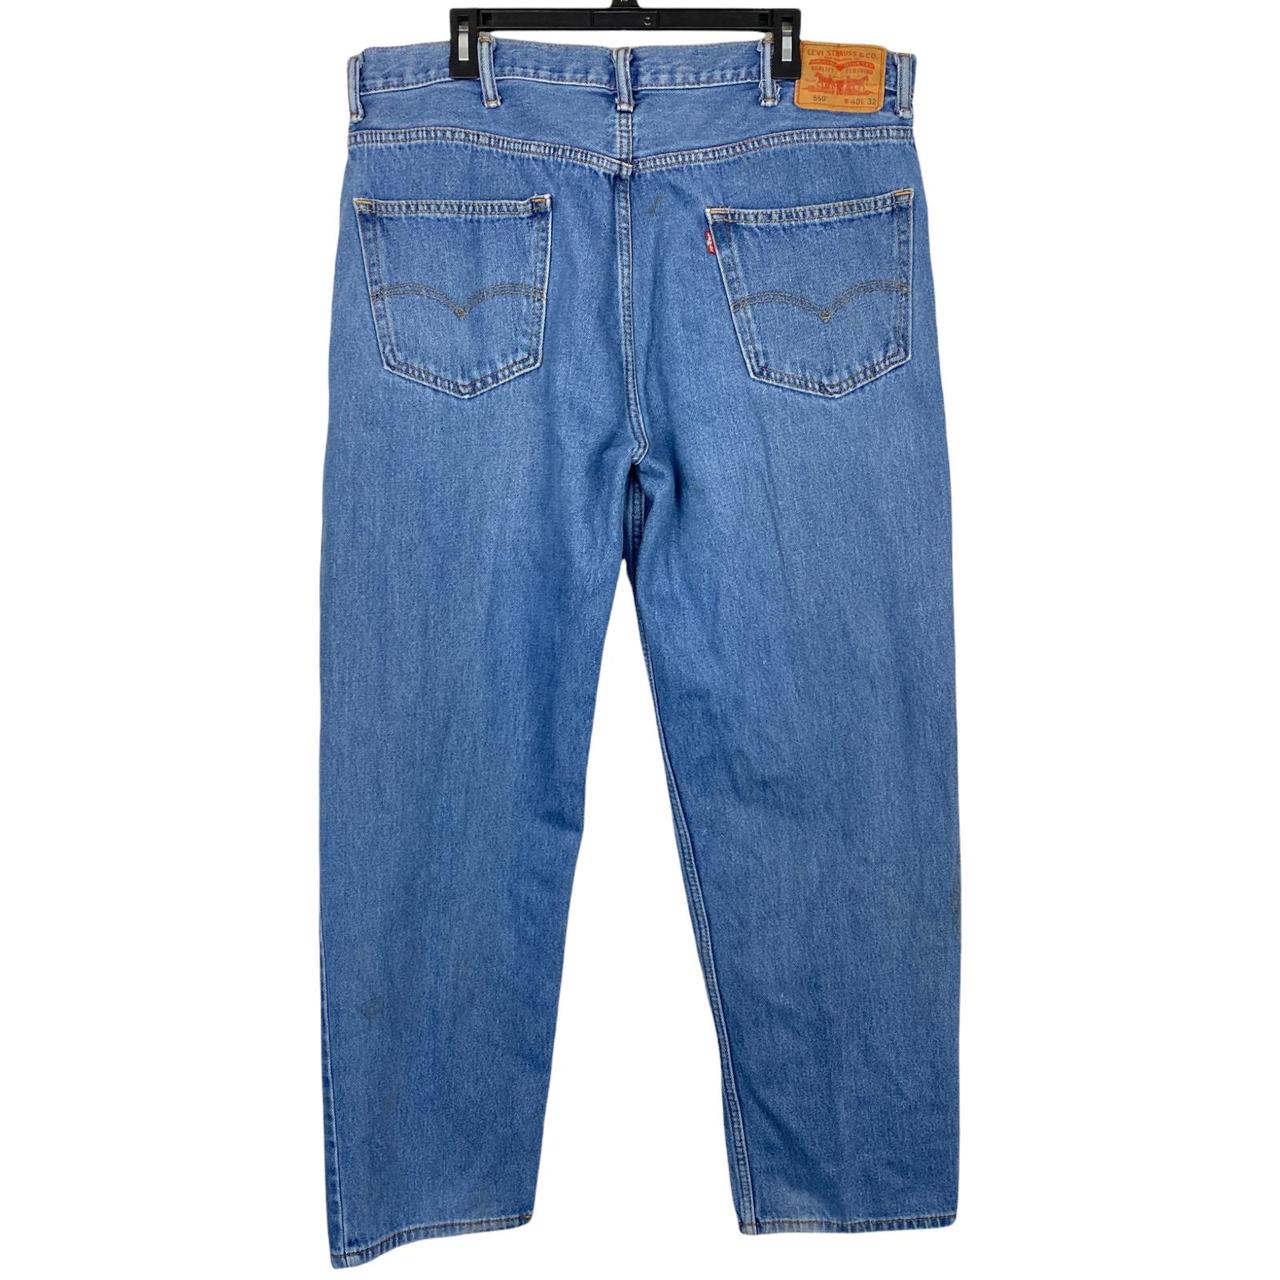 Product Image 2 - Levis 550 Relaxed Fit Tapered